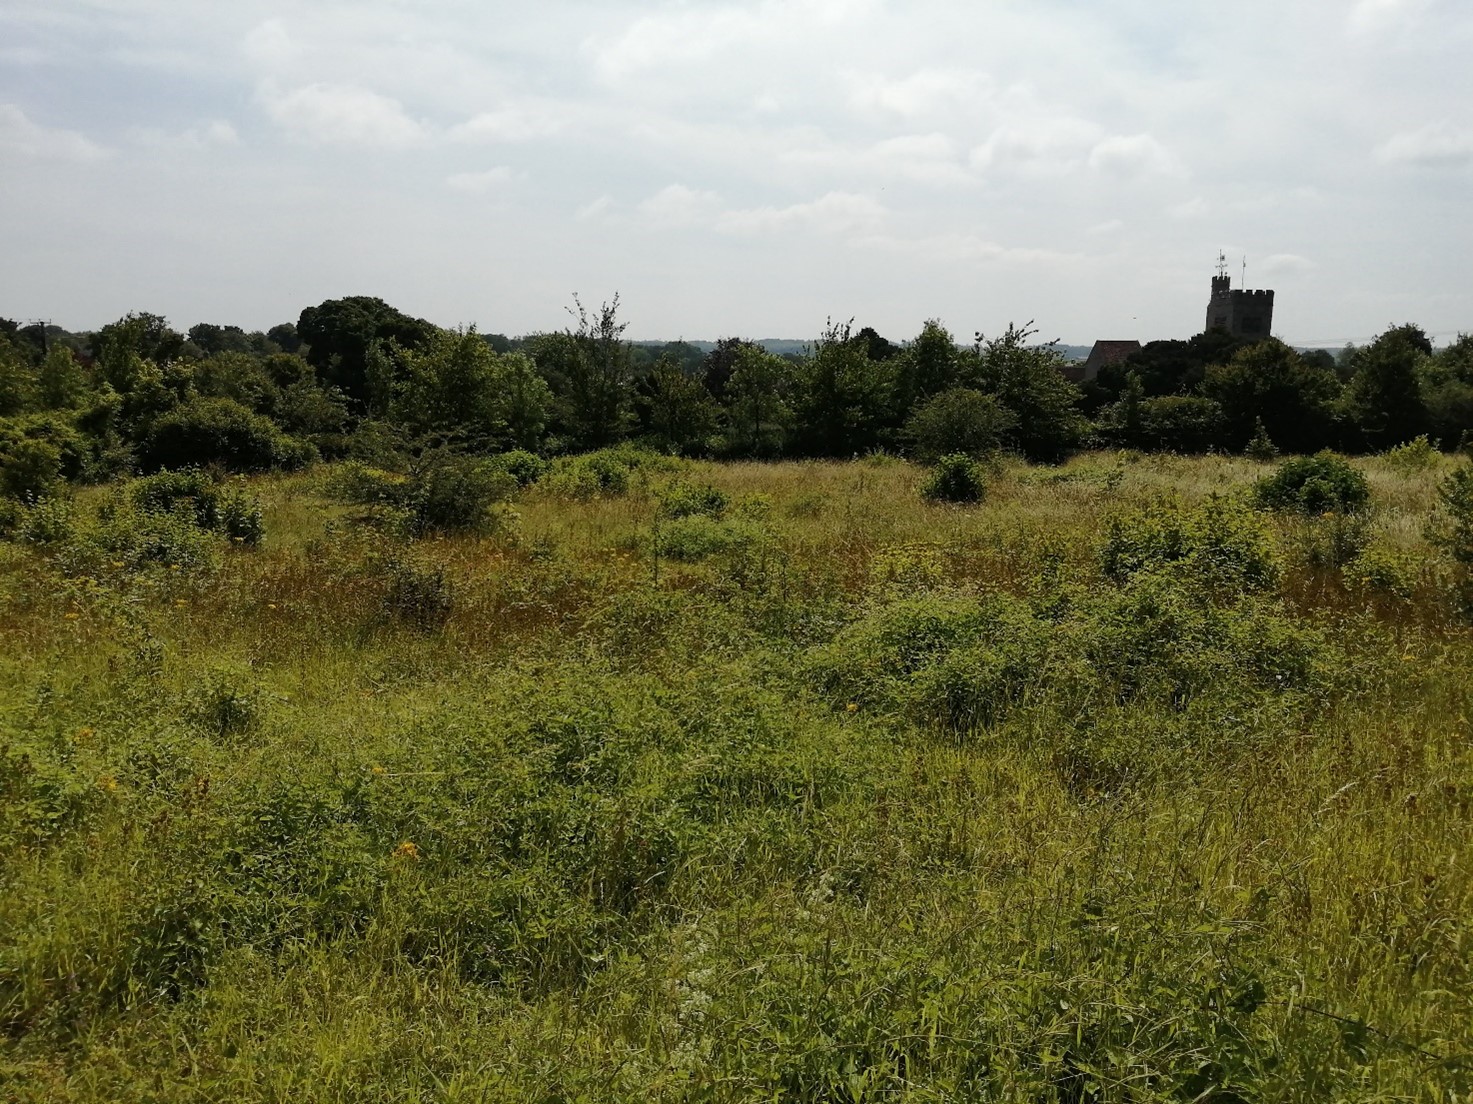 A view of Teers Meadow looking towards the church.